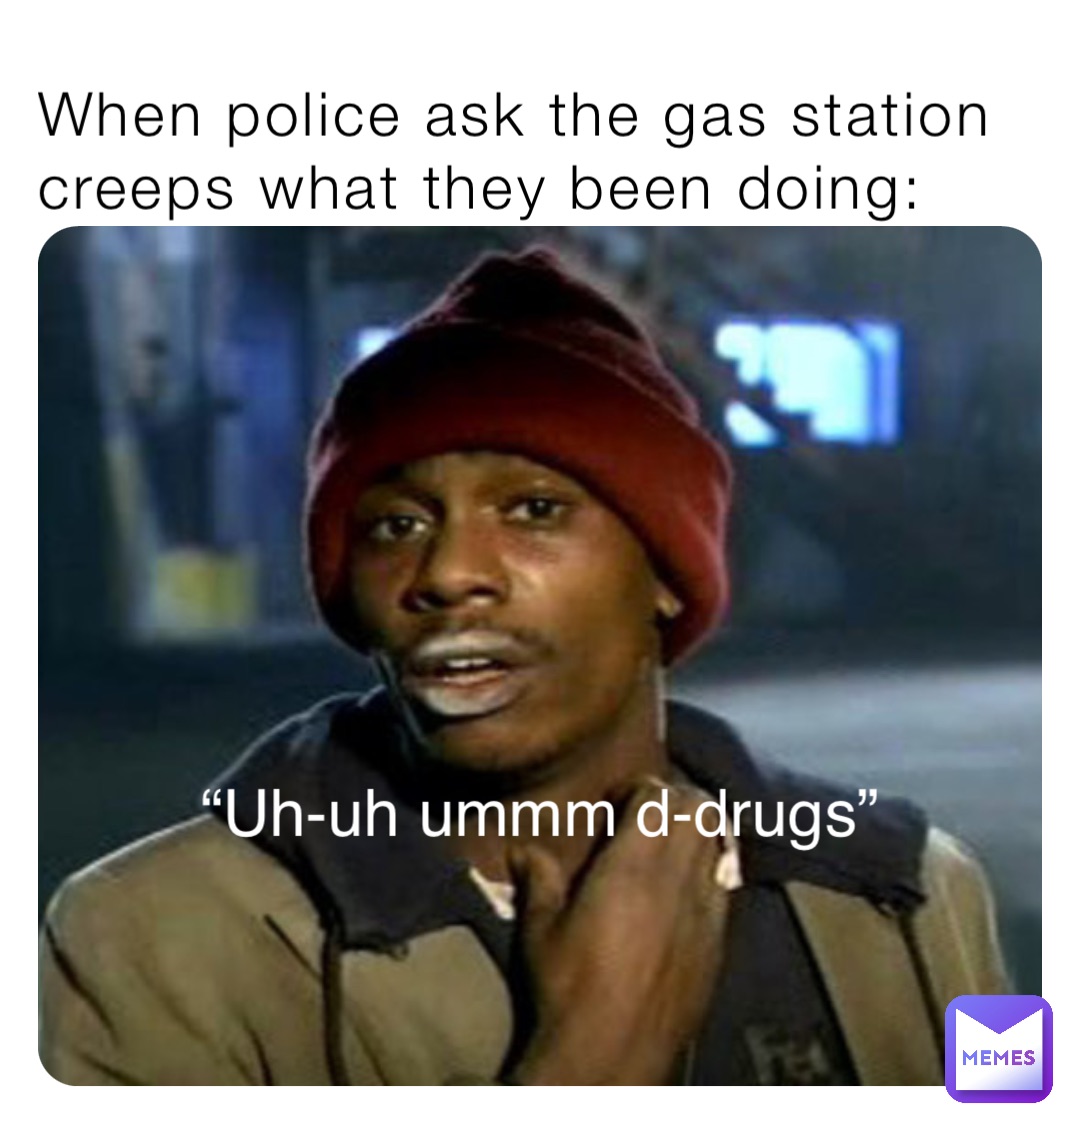 When police ask the gas station creeps what they been doing: “Uh-uh ummm d-drugs”